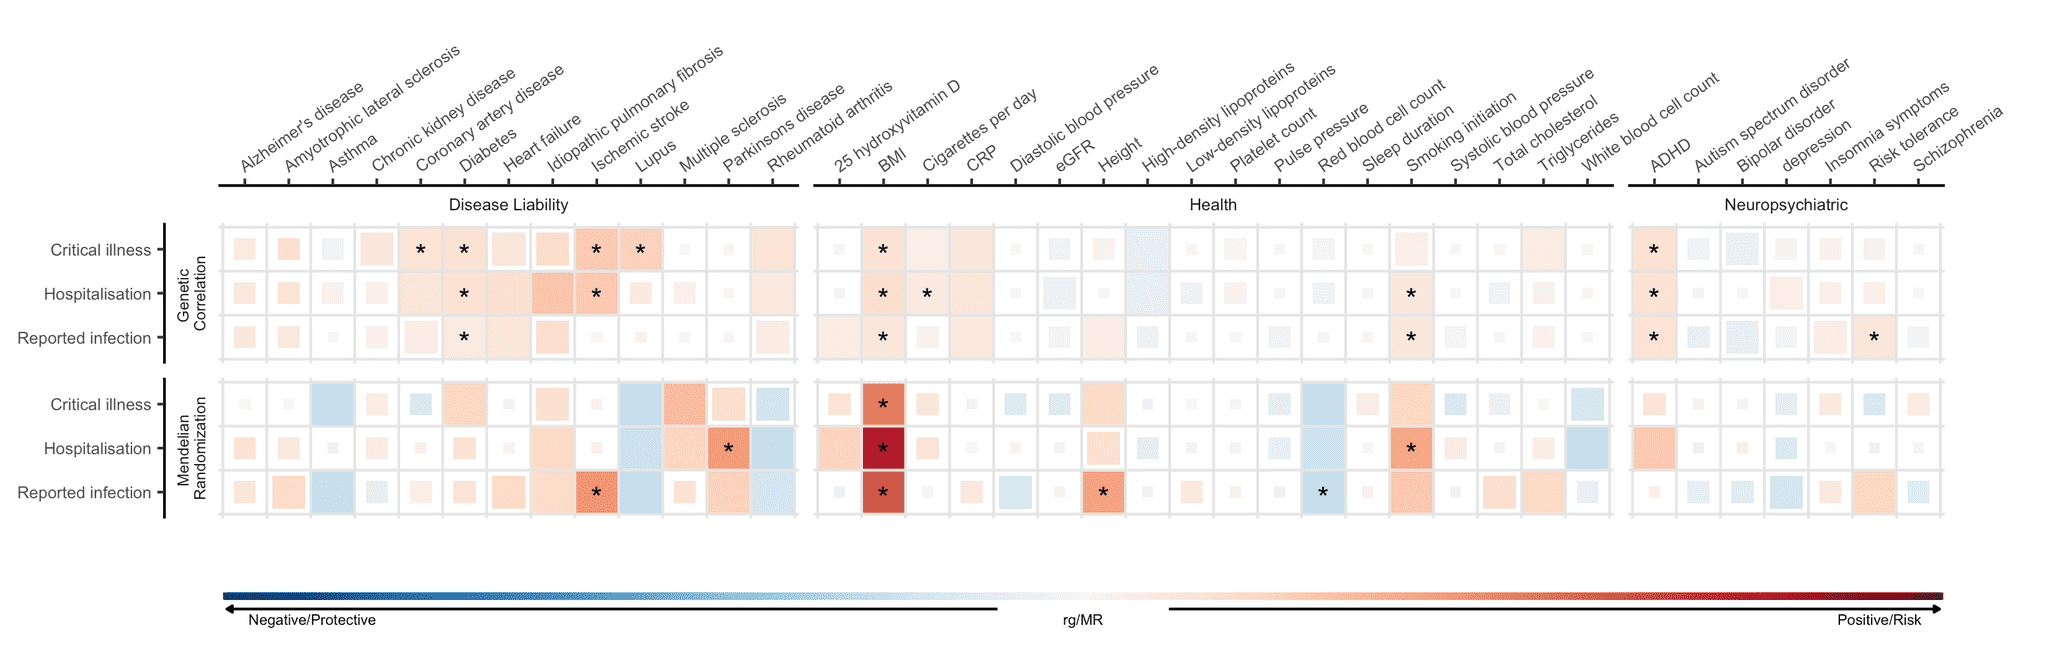 Figure 5: Genetic correlations and Mendelian randomization causal estimates between 43 traits and COVID-19 severity and SARS-CoV-2 reported infection.